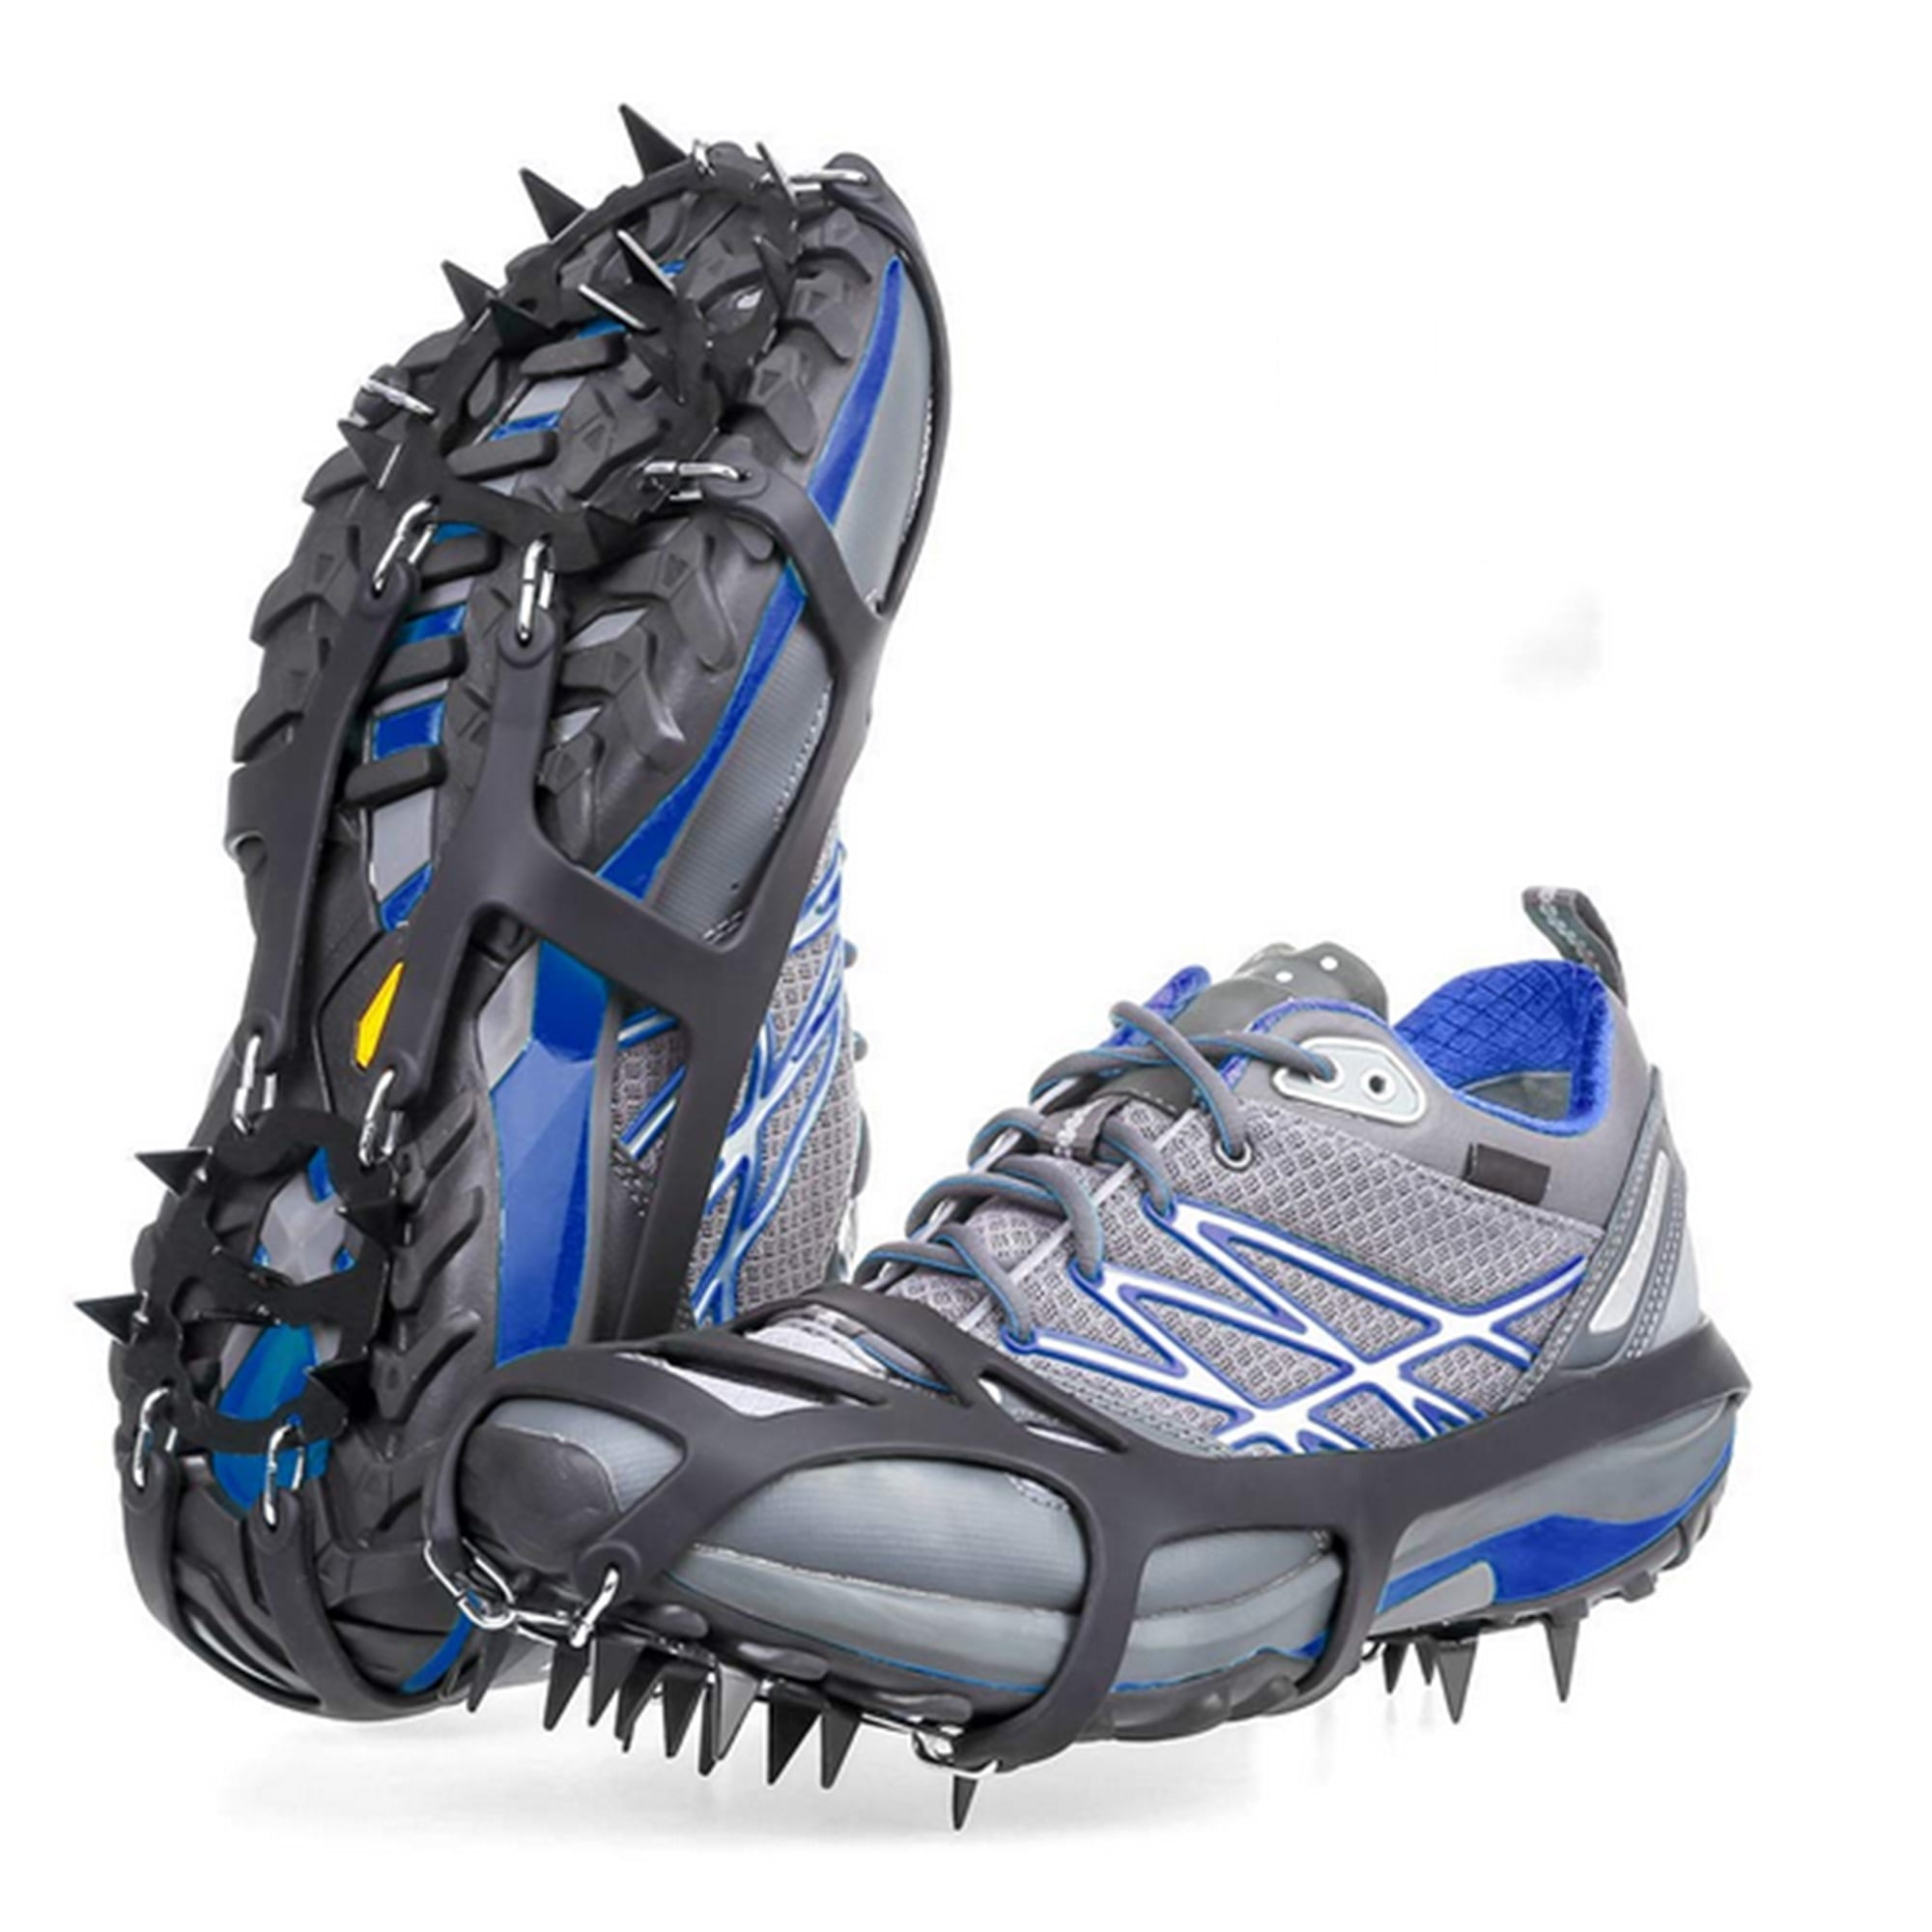 BG_ 1Pair Outdoor Sports over Non-slip Crampons Ice Grip Walk Traction Cleats HO 